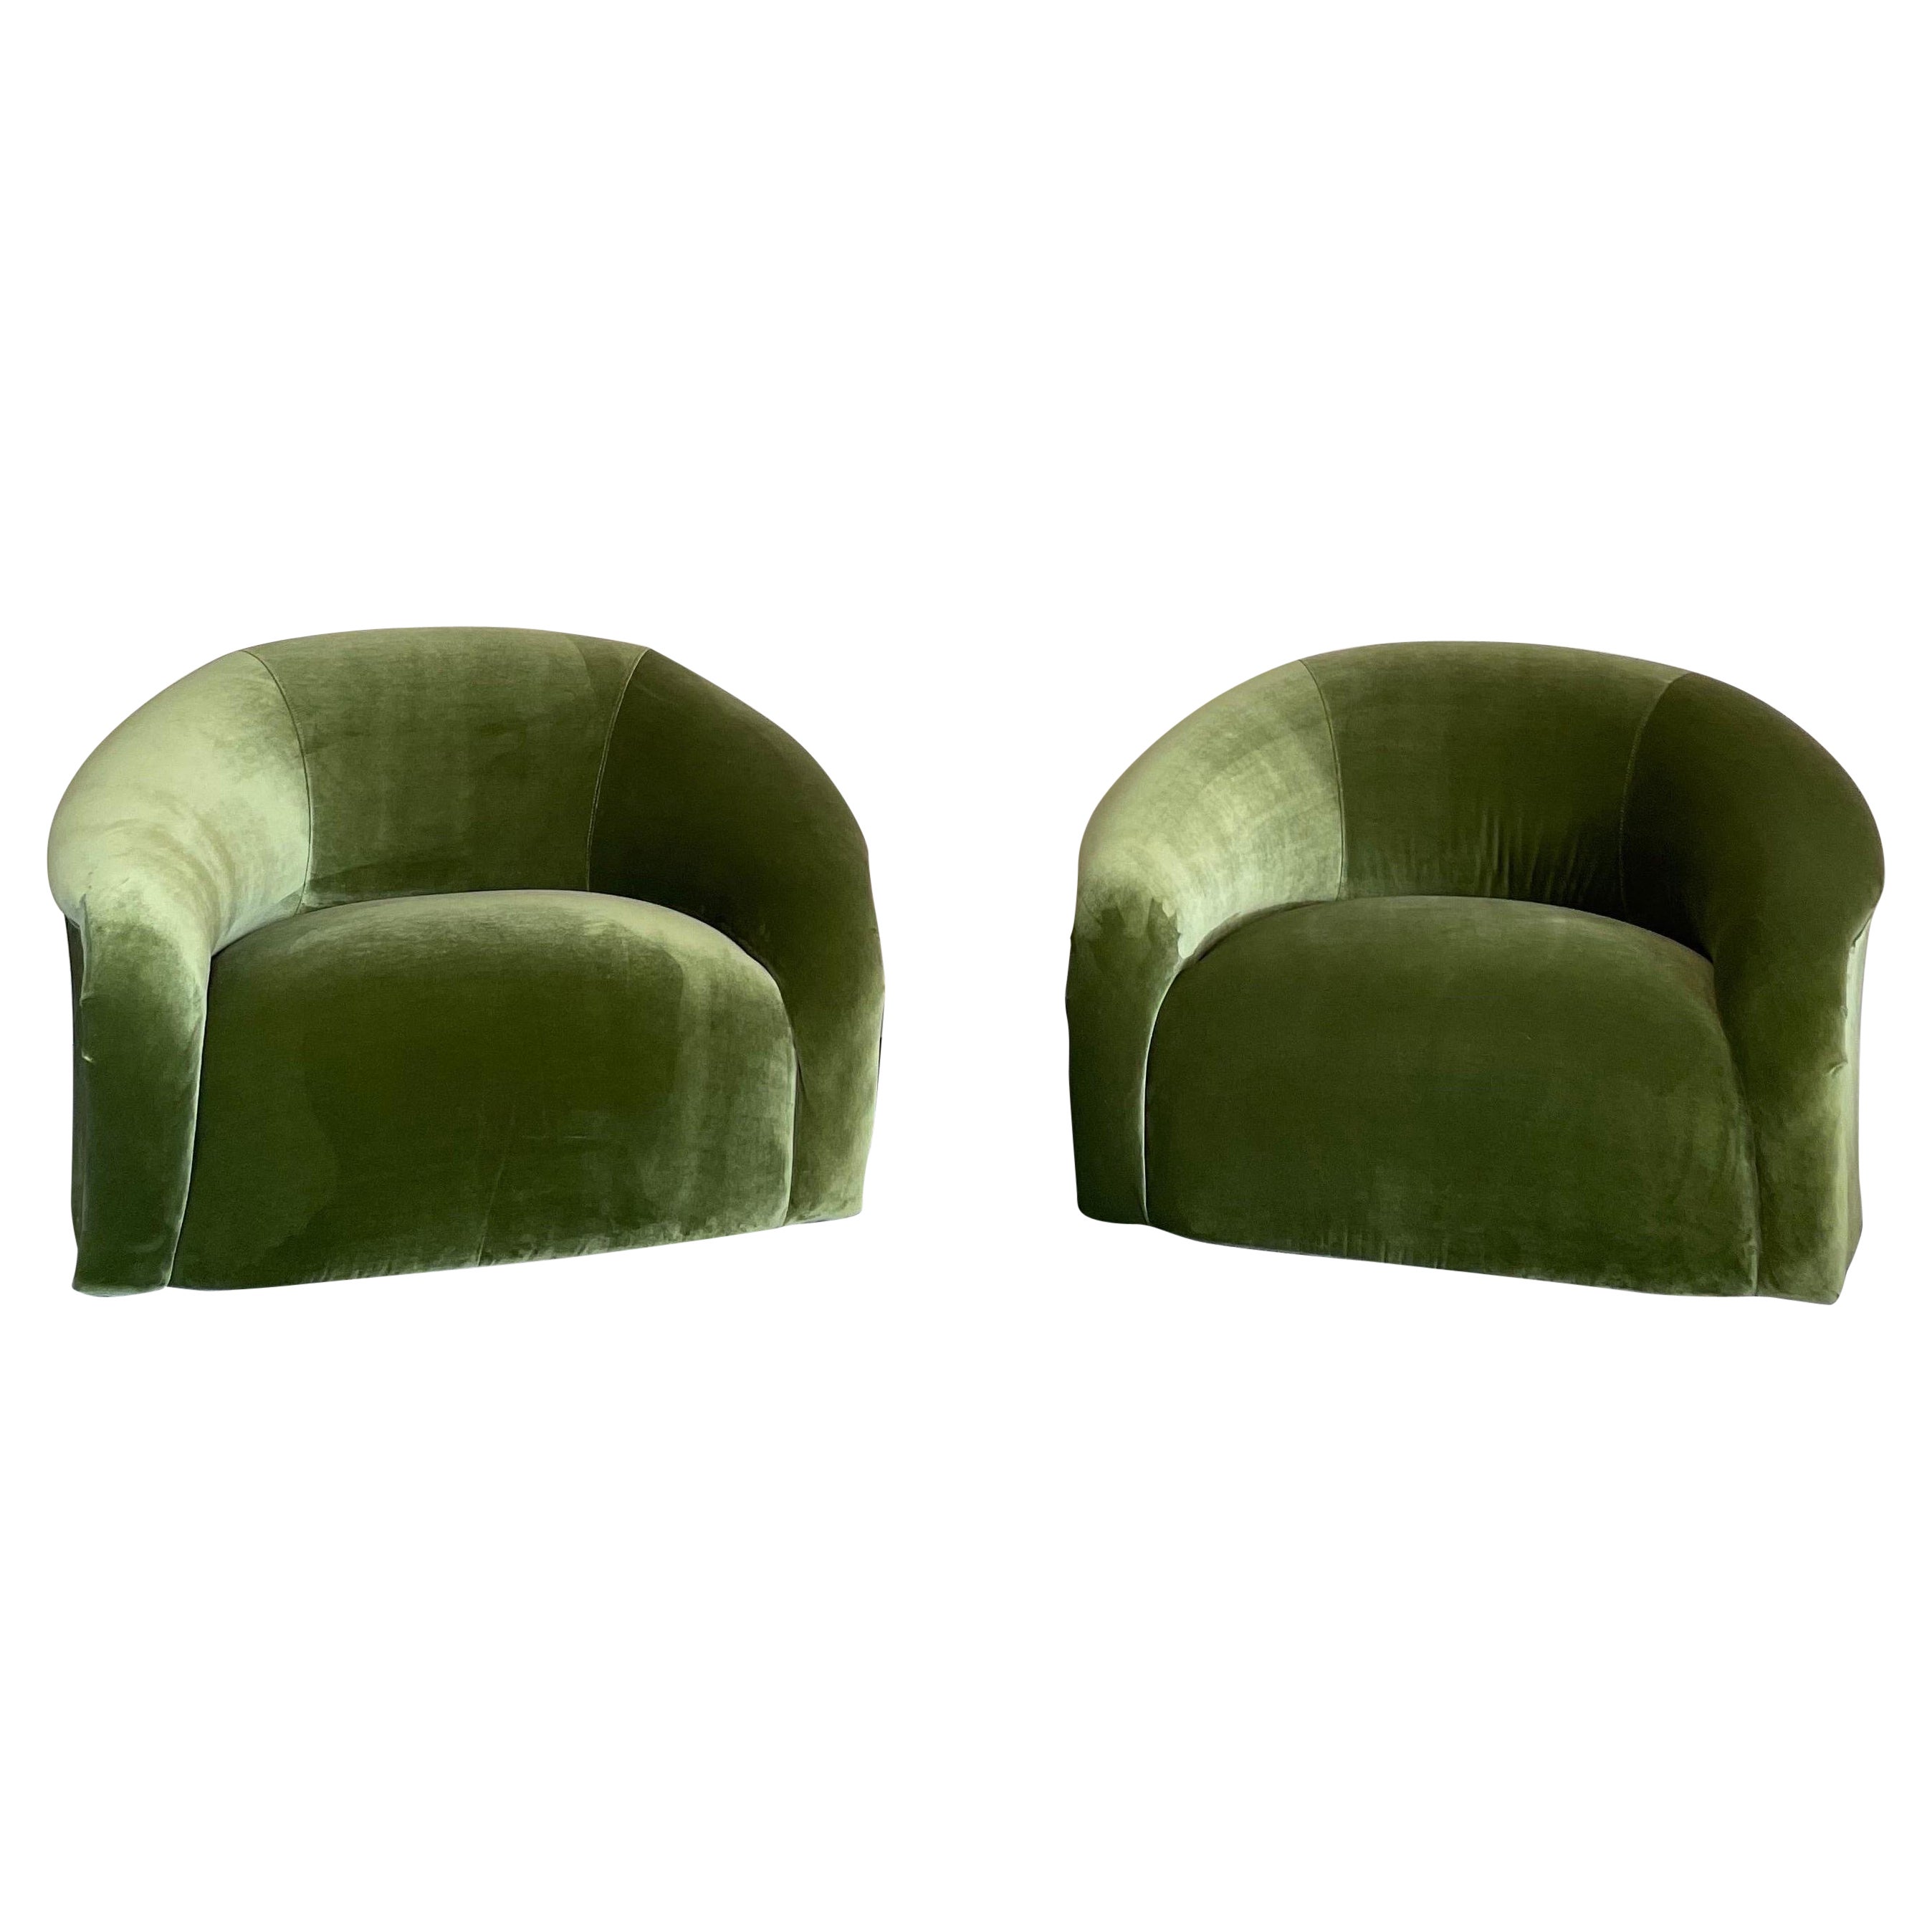 Vintage Oversized Tub Chairs by Sally Sirkin Lewis for J Robert Scott- a Pair For Sale